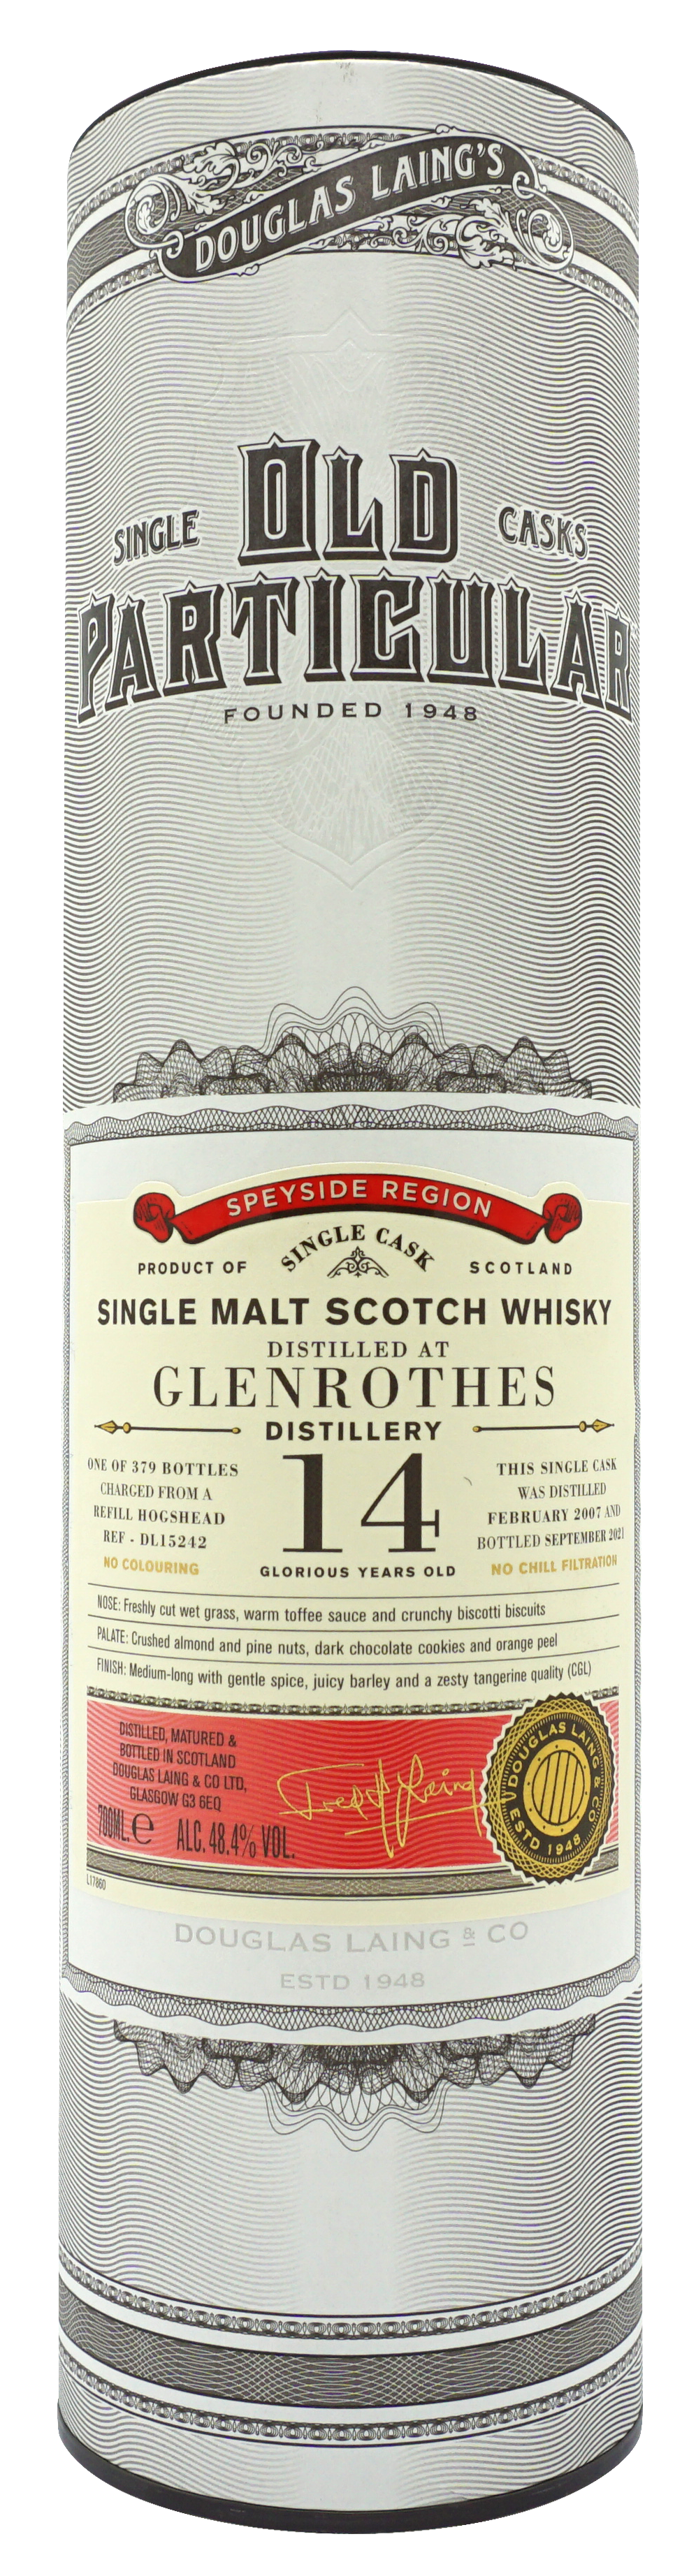 Old Particular Glenrothes 14 Years Single Malt 70cl 484 Koker